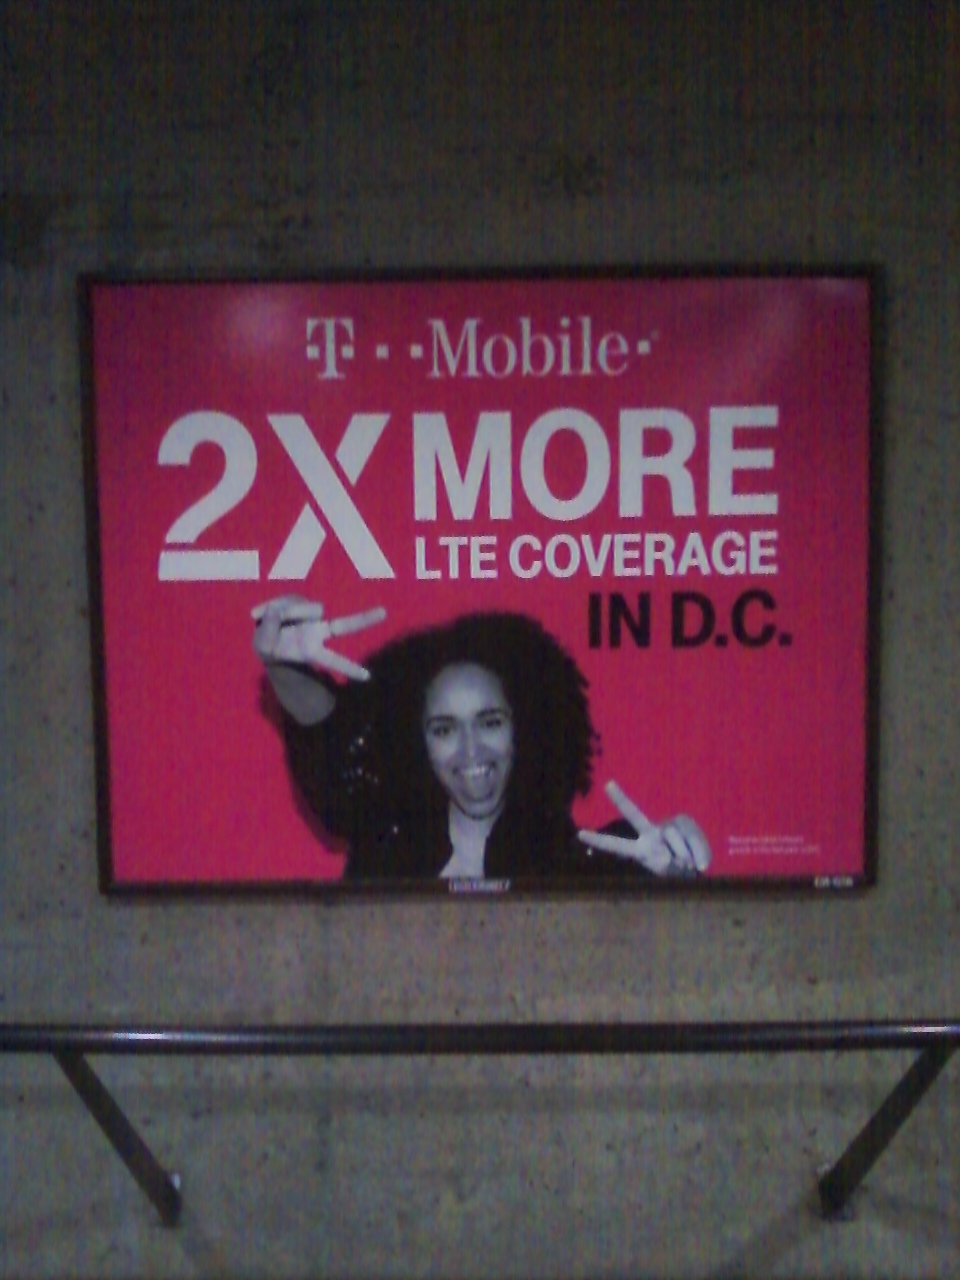 WMATA/DC Metro T-Mobile Advertisement promoting two times as much
4G/LGE coverage when it seems they can barely manage 2G in most Metro
stations. For additional details, please visit
www.wirelessnotes.org.